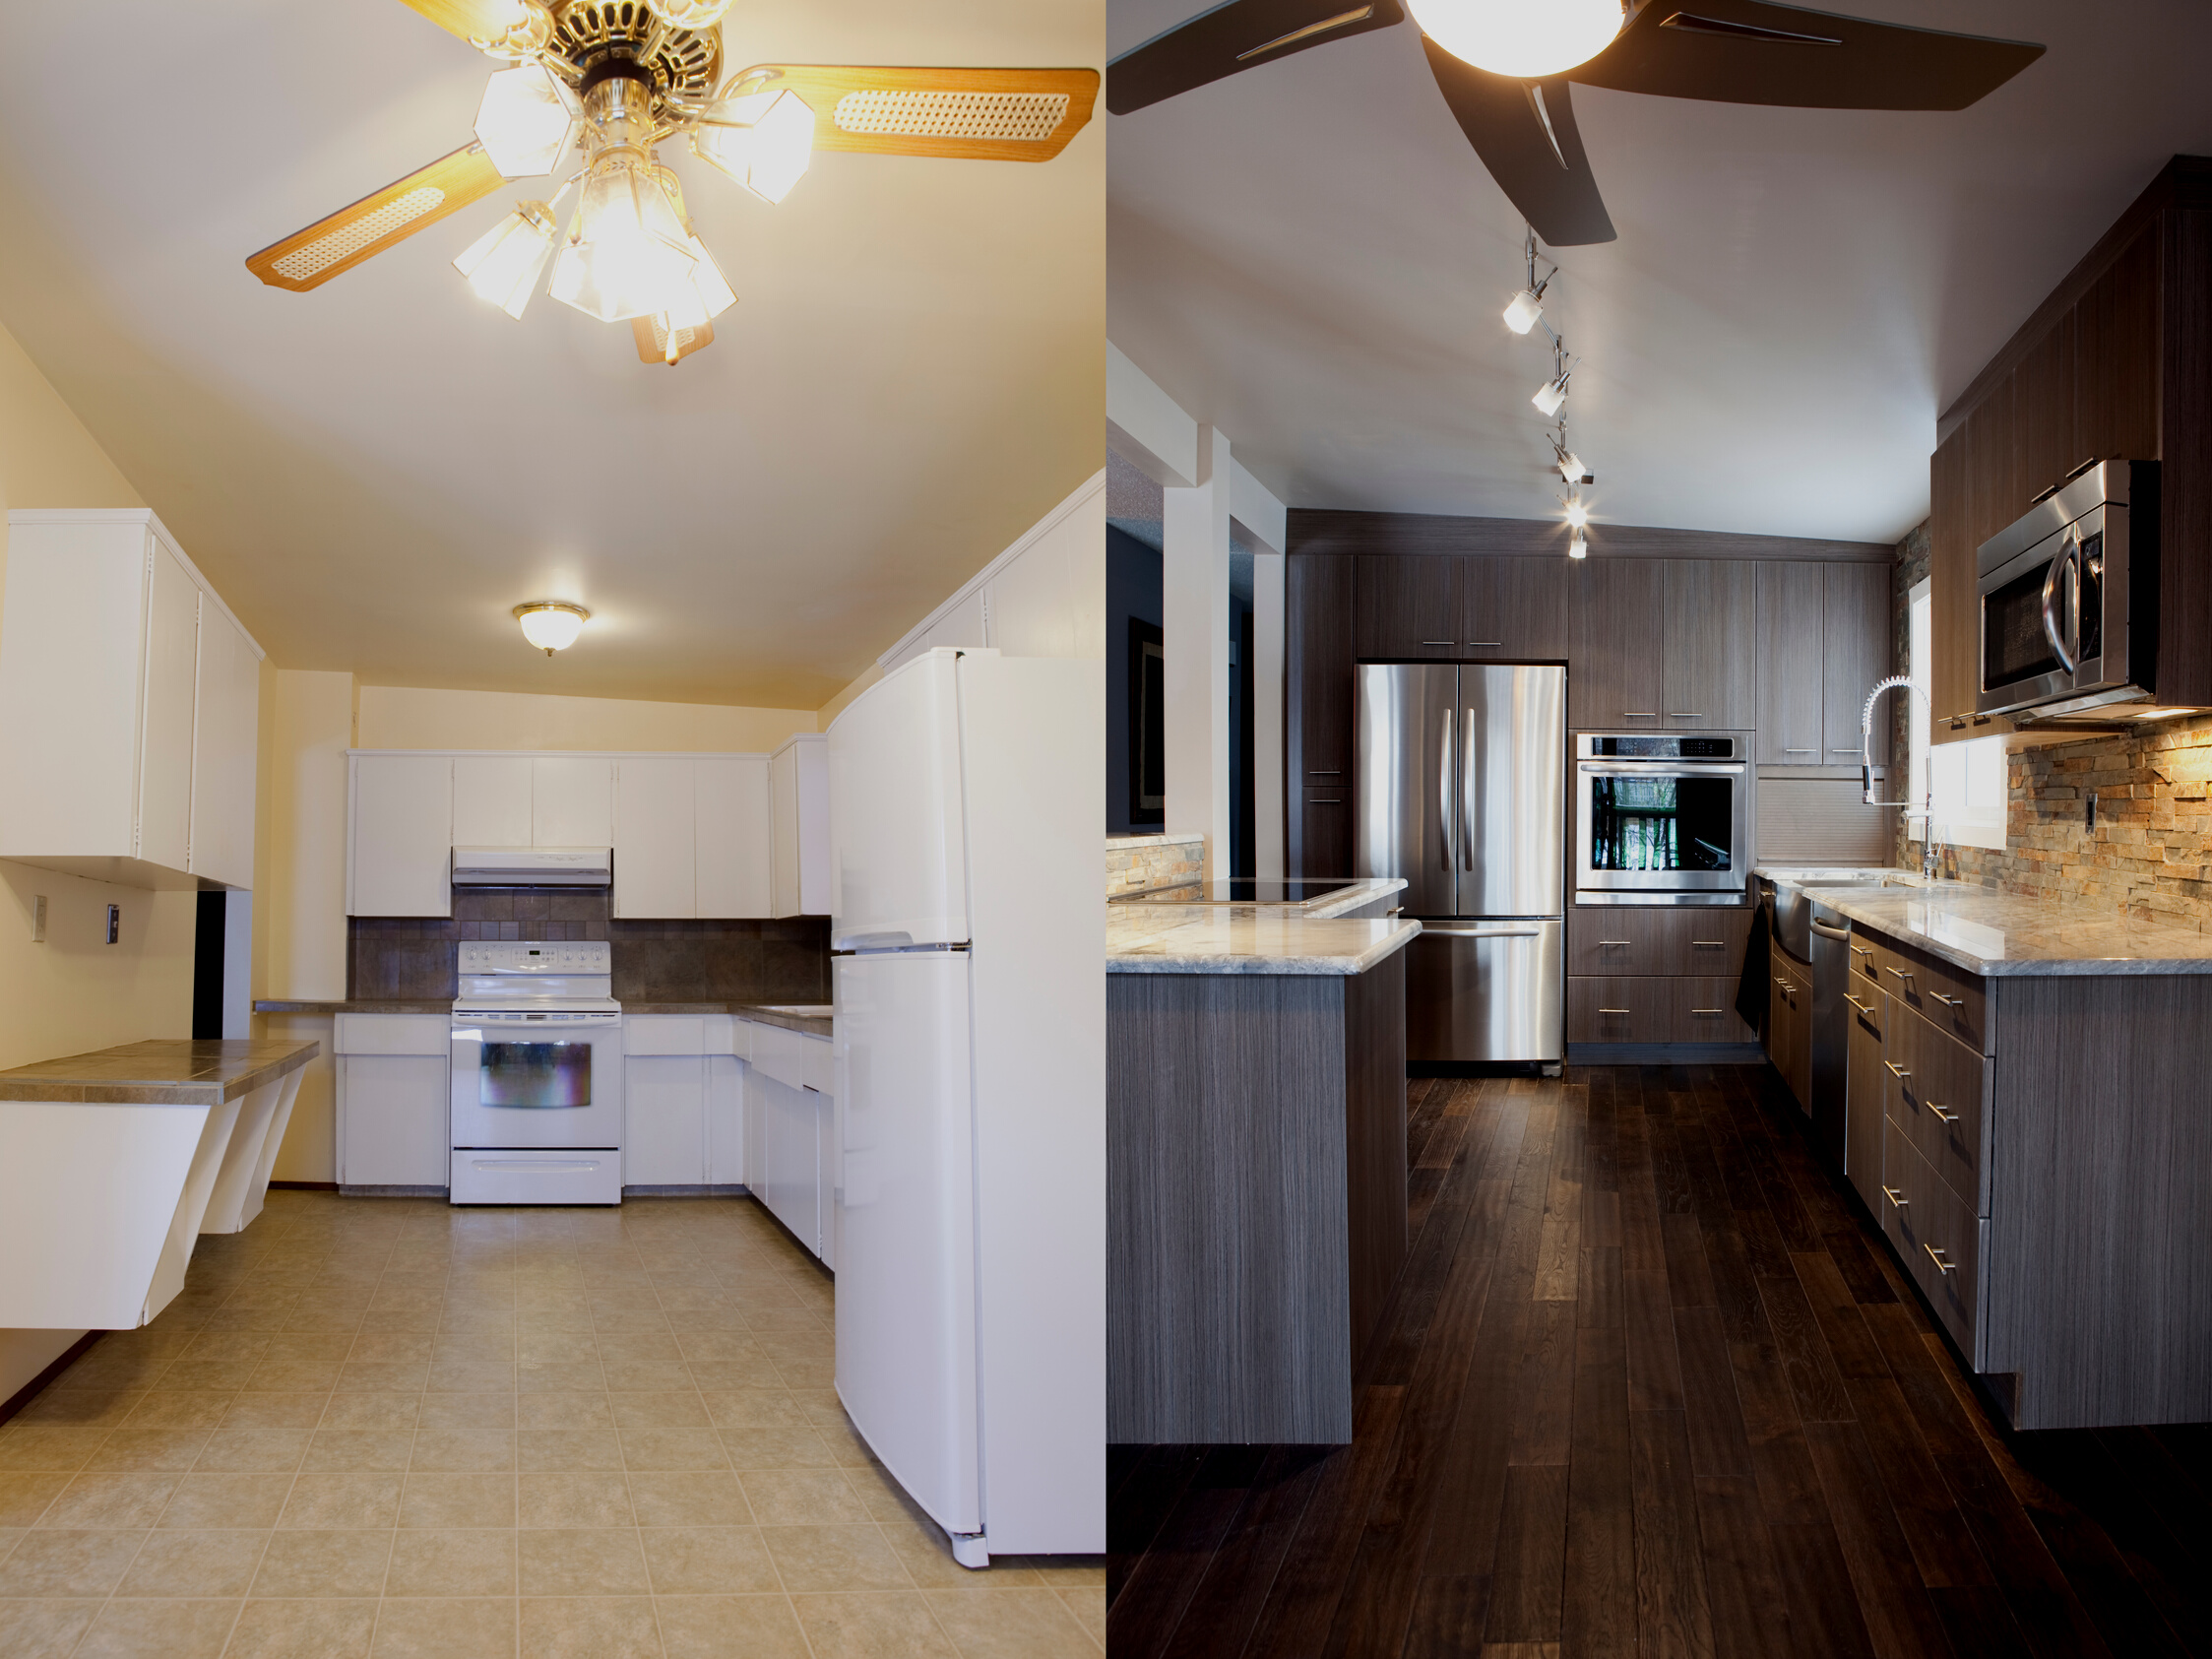 Home Renovations Kitchen Before and After